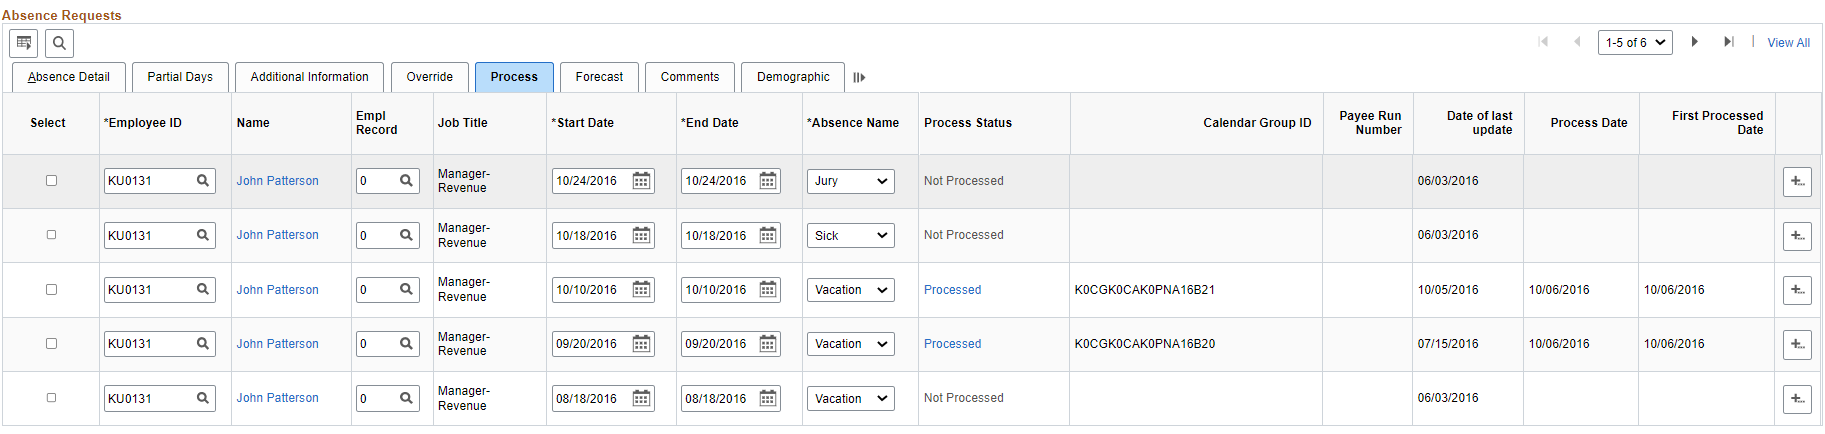 Create and Maintain Absence Requests page: Process tab